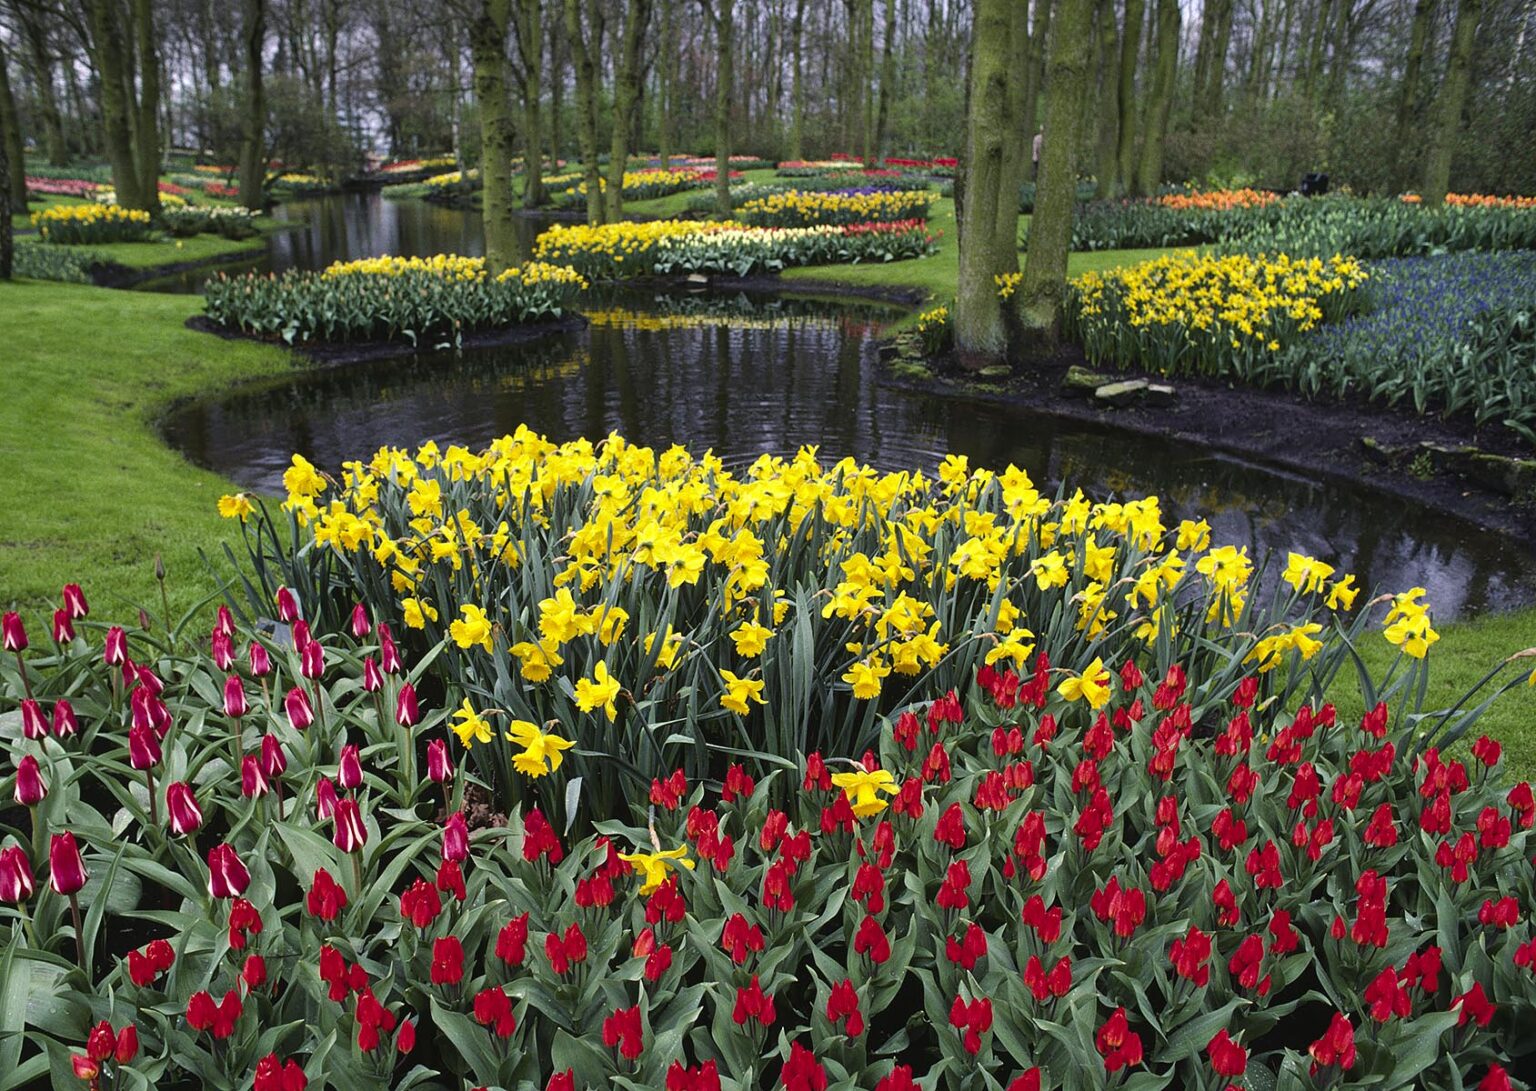 The KUKENHOFF GARDENS grow every kind of TULIP imaginable & other bulbs, plants & trees as well - THE NETHERLANDS